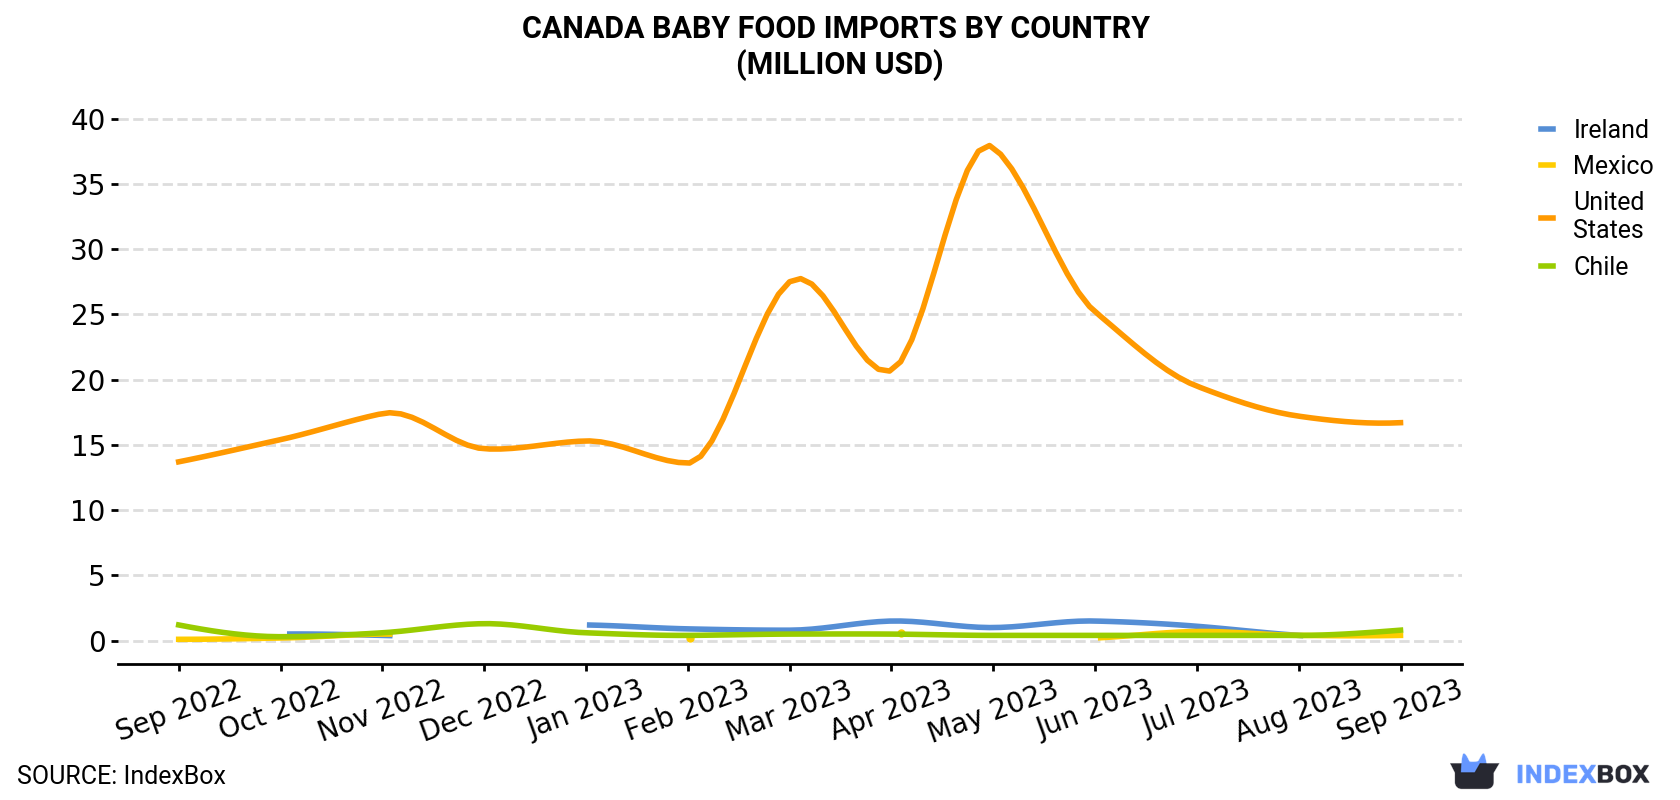 Canada Baby Food Imports By Country (Million USD)